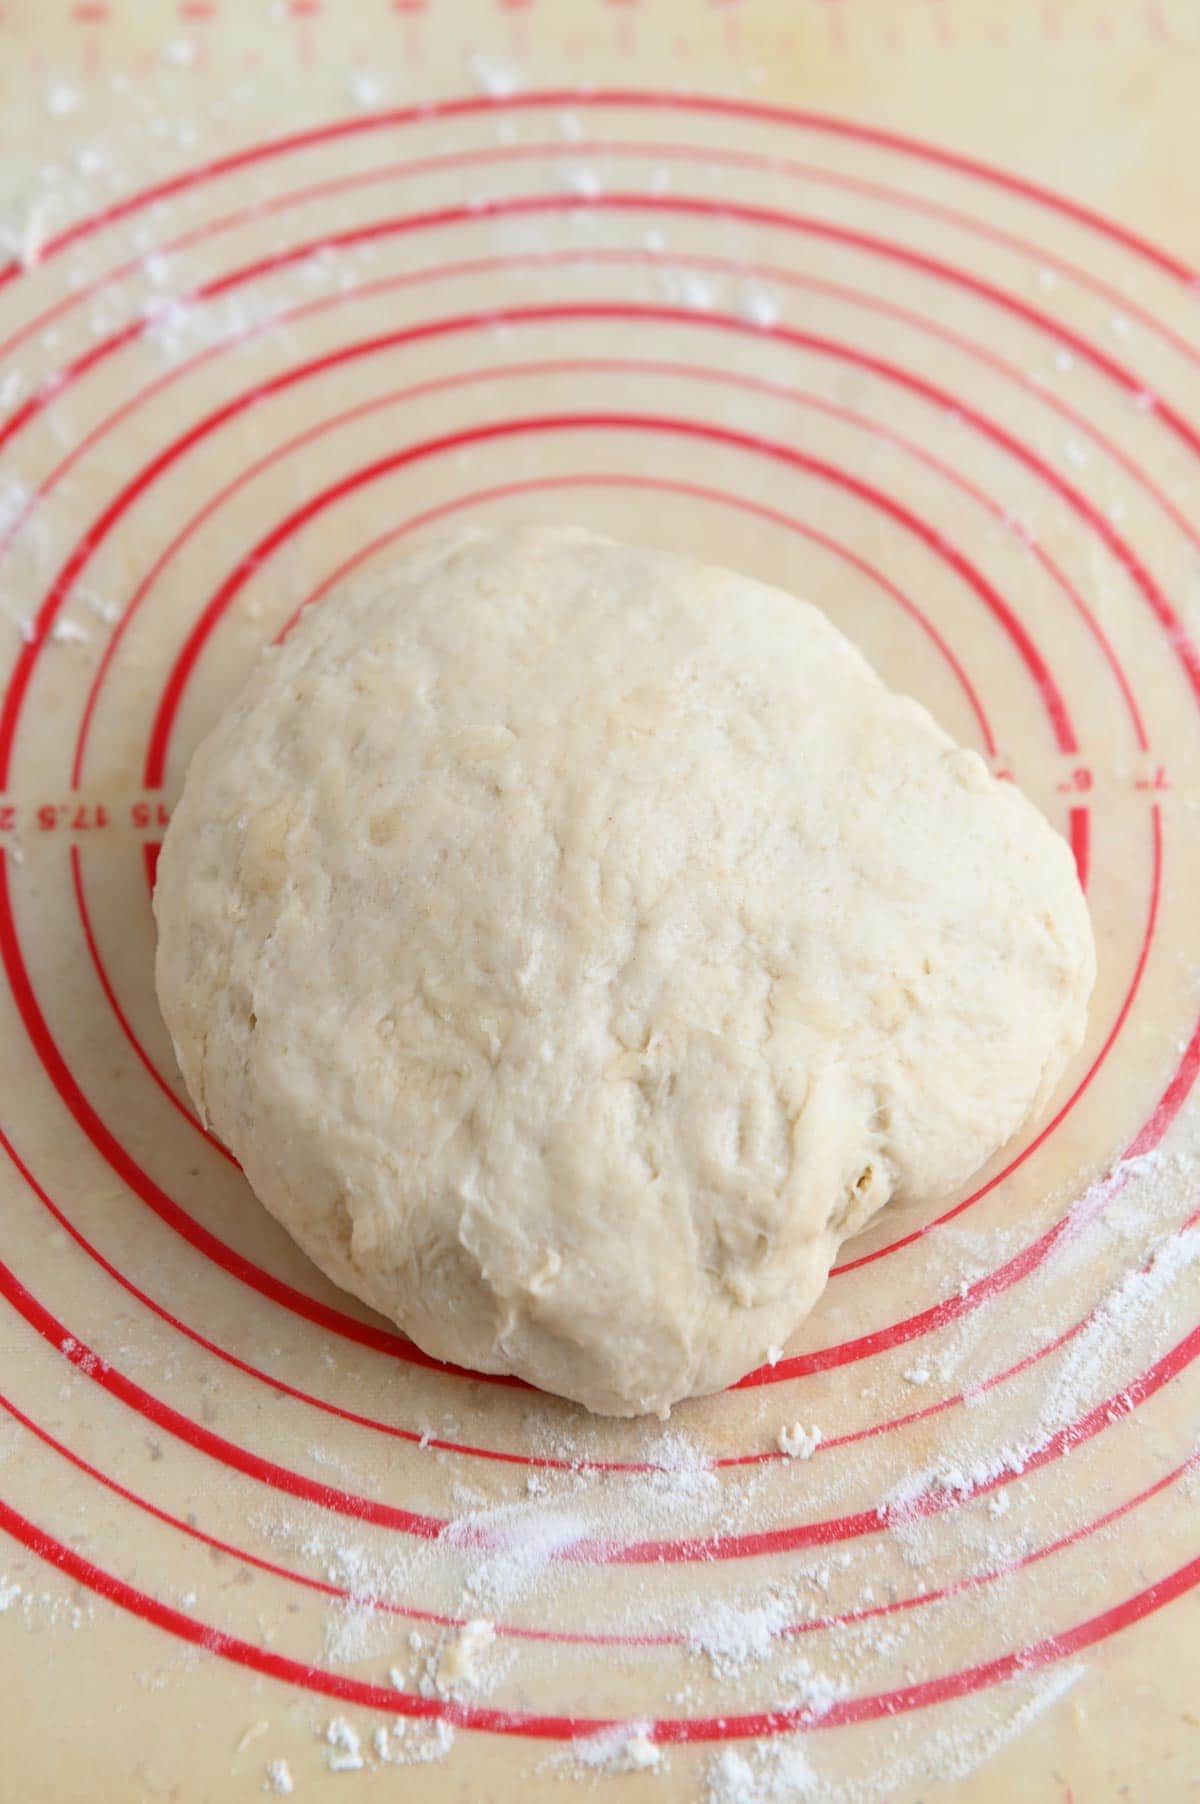 Smooth white ball of dough in the center of a surface with red circles